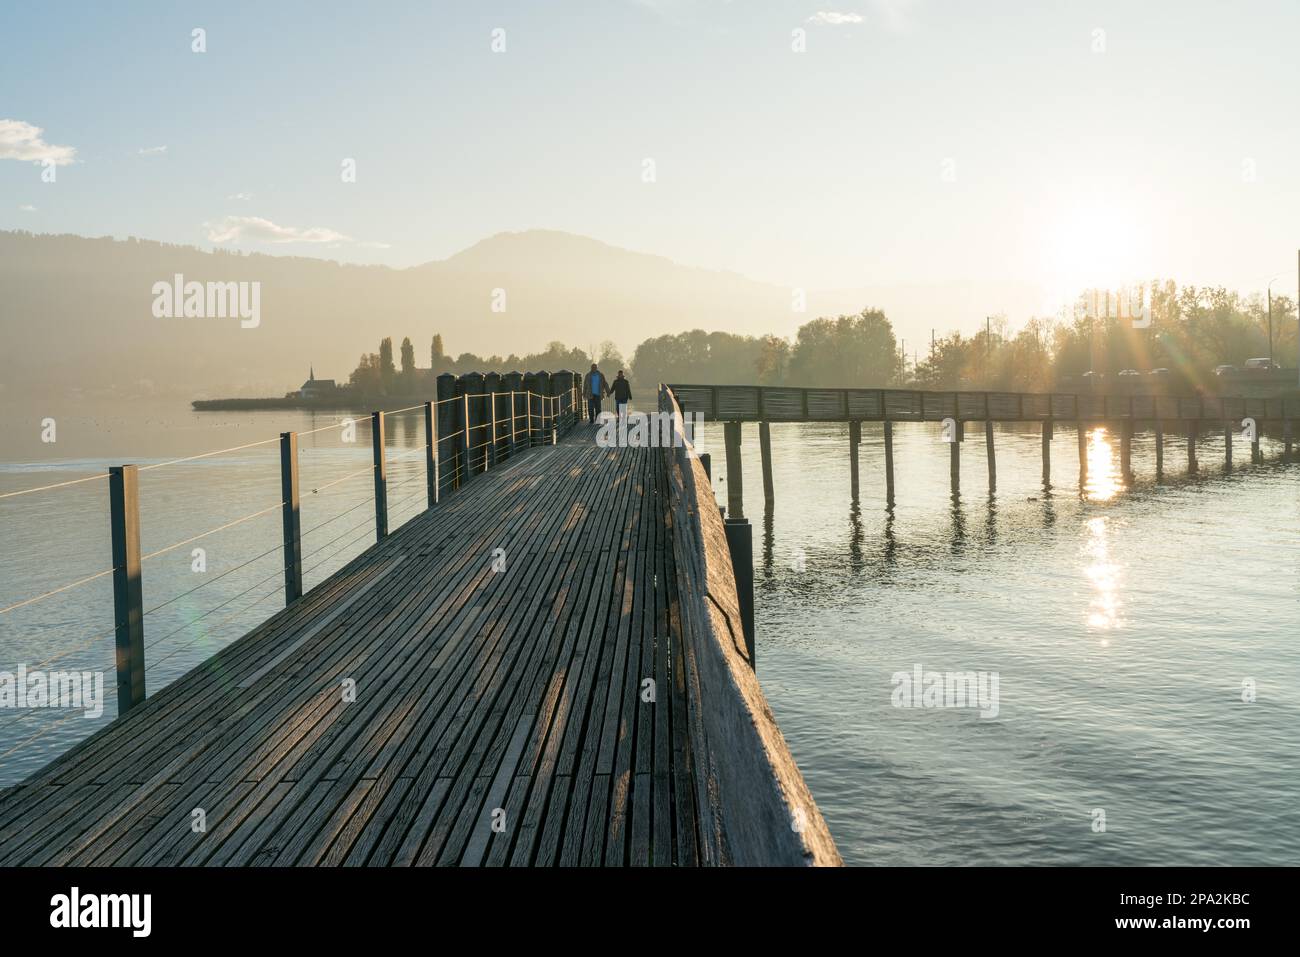 Landscape view of marsh and lake shore in evening light and a long wooden boardwalk in the foreground in late autumn in Switzerland with a couple Stock Photo